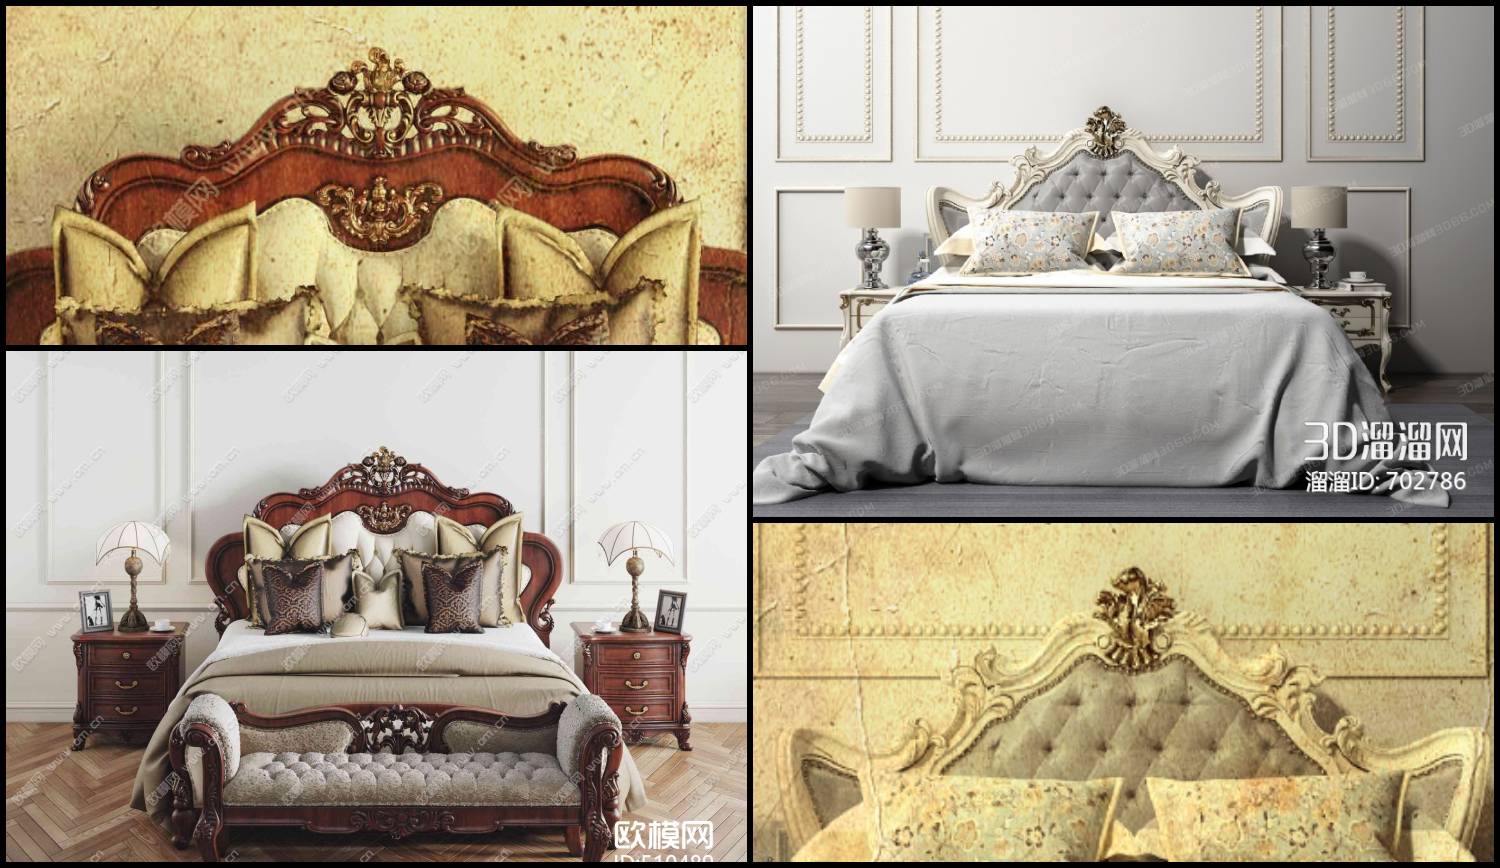 11035. 3D Neoclassical Bed Model For Free Download